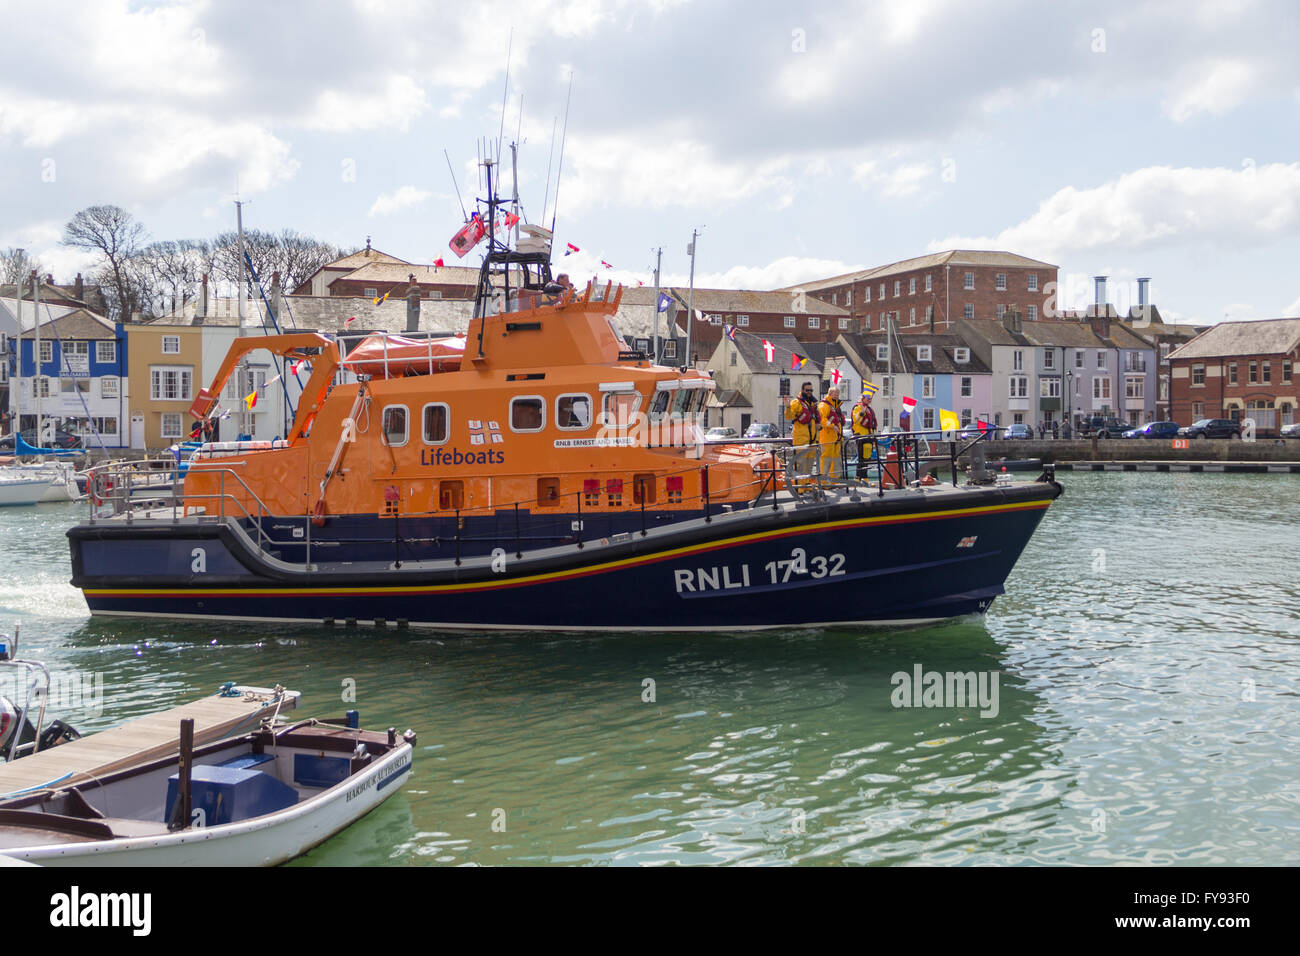 Weymouth, England. 23 April 2016. Queen's 90th Birthday Floating Tribute. RNLI Lifeboat 2. Credit:  Frances Underwood/Alamy Live News Stock Photo